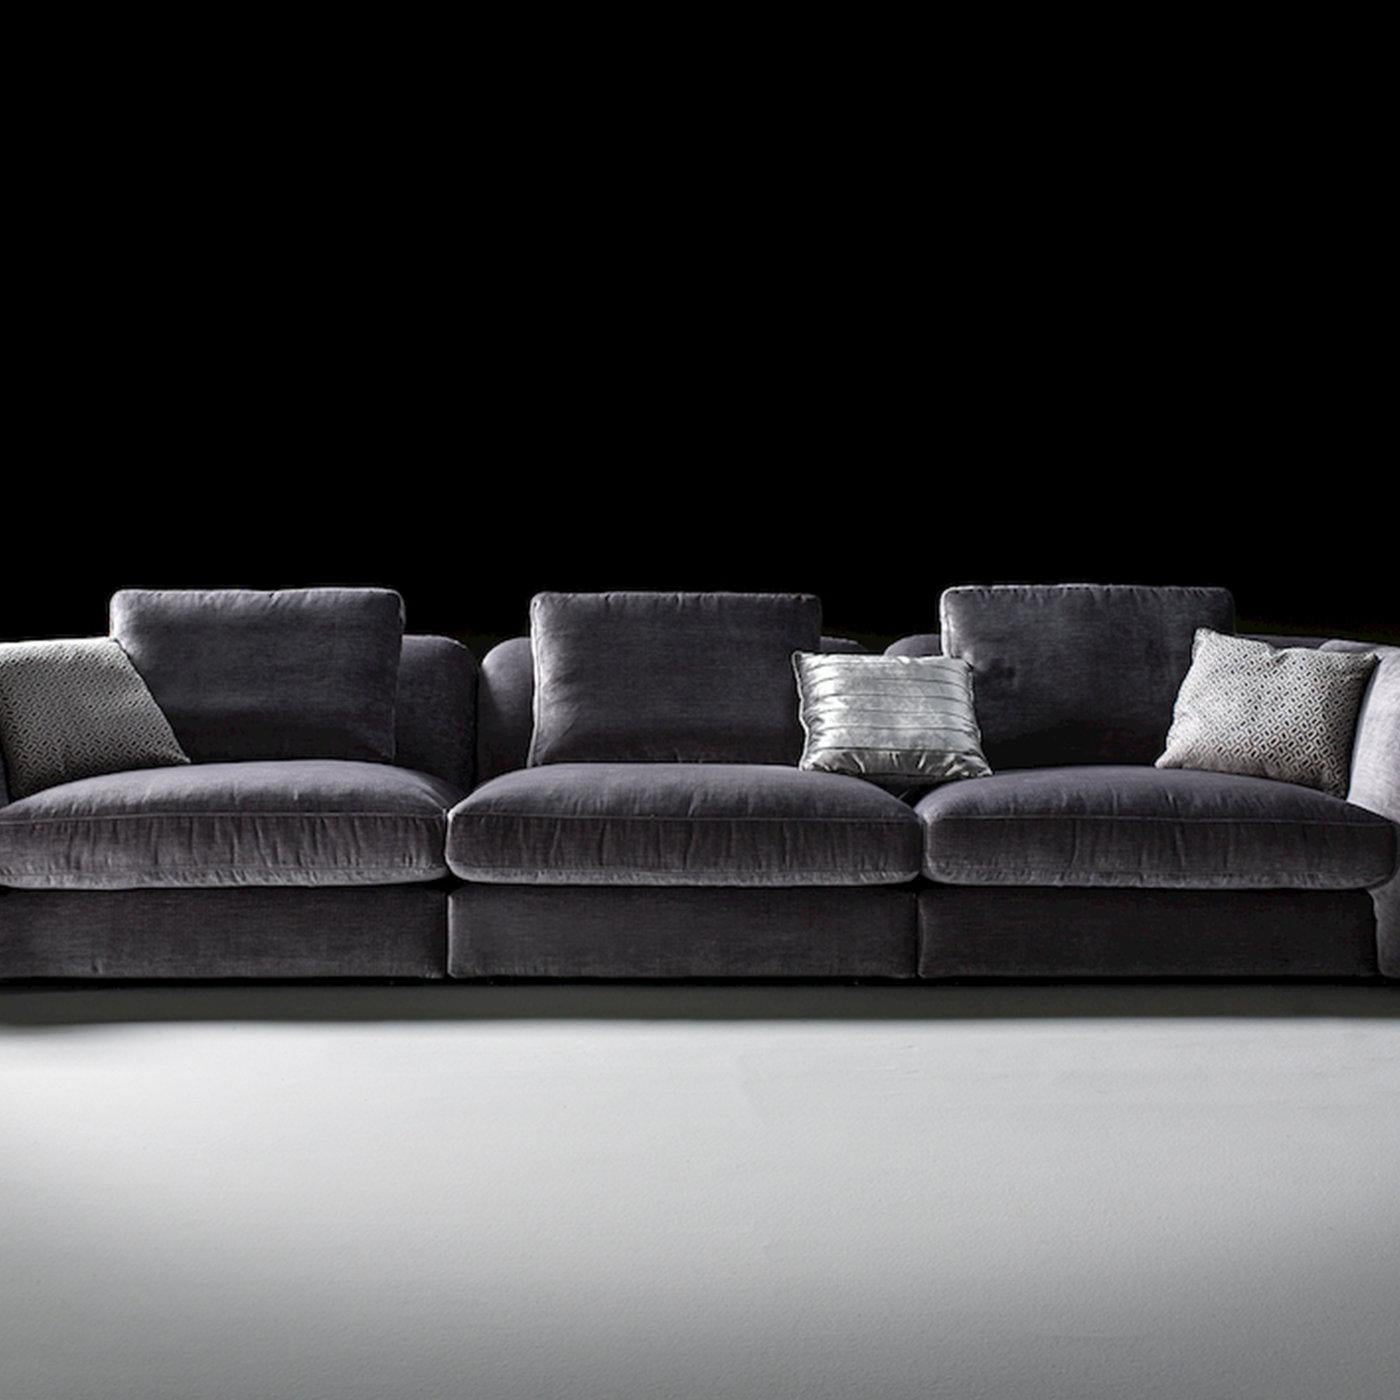 Elegant and comfortable, this sofa features a delicate gray hue that will infuse any interior with sophistication. Furnished with an elastic belt spring system, the poplar structure is covered with thermo-bonded fiber and flexible jersey fabric. The